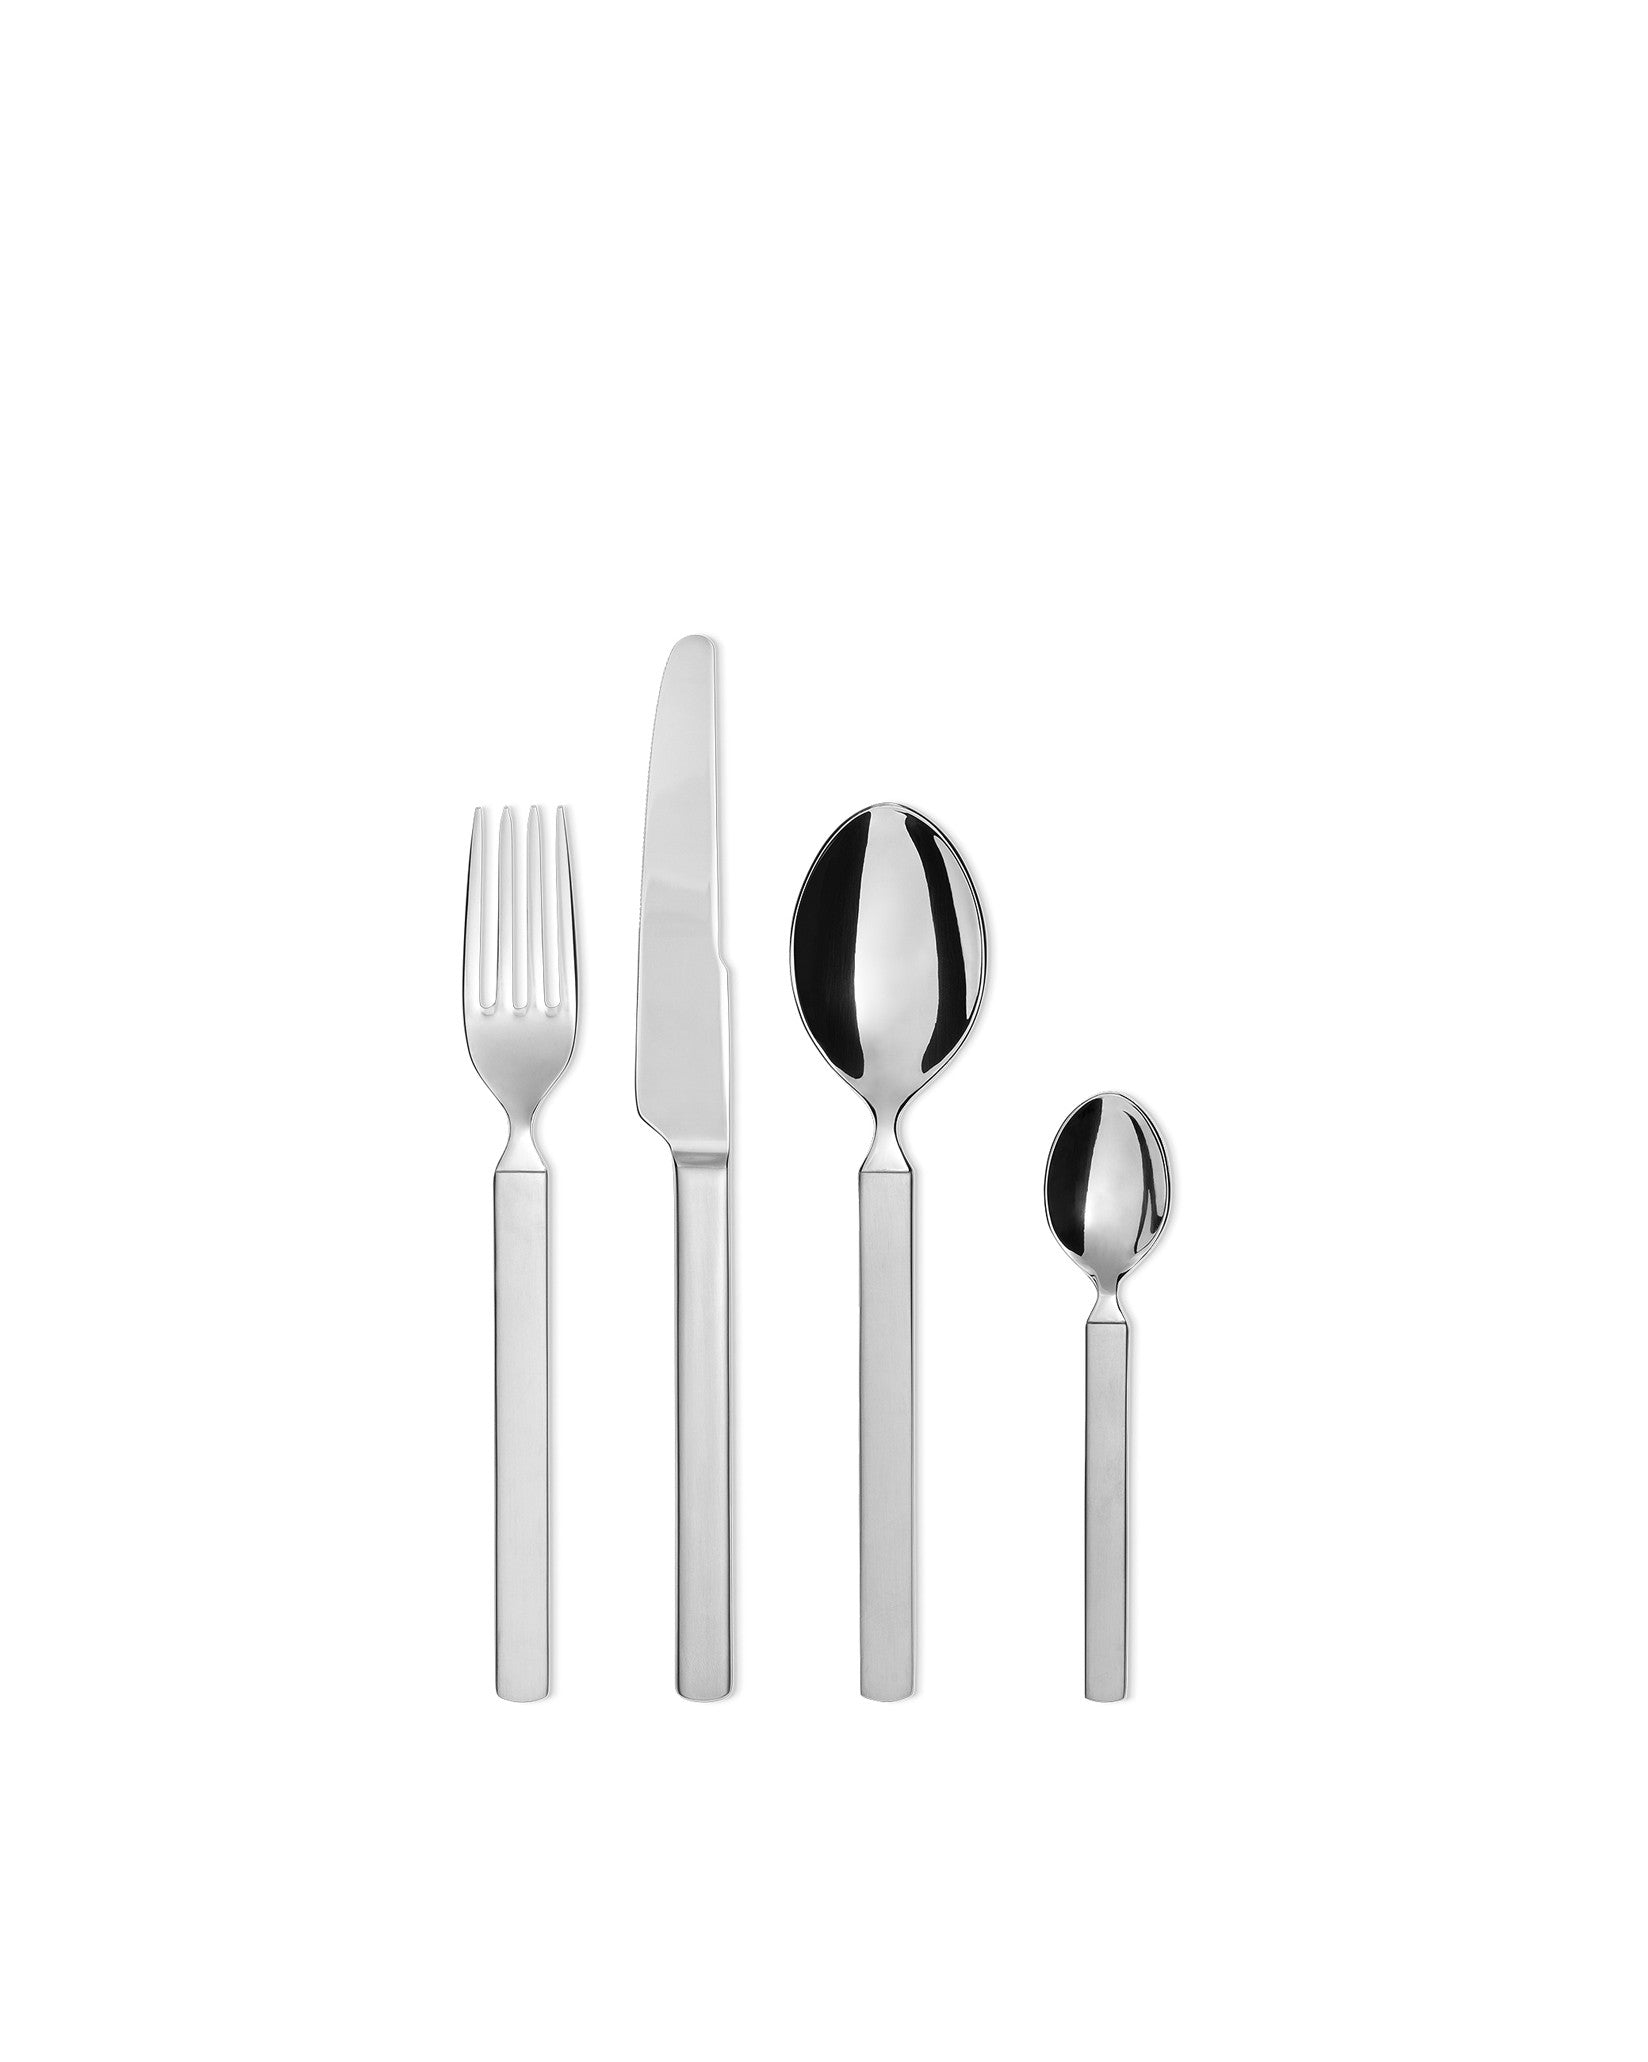 Dry - Cutlery set 24 – Alessi USA Inc pieces